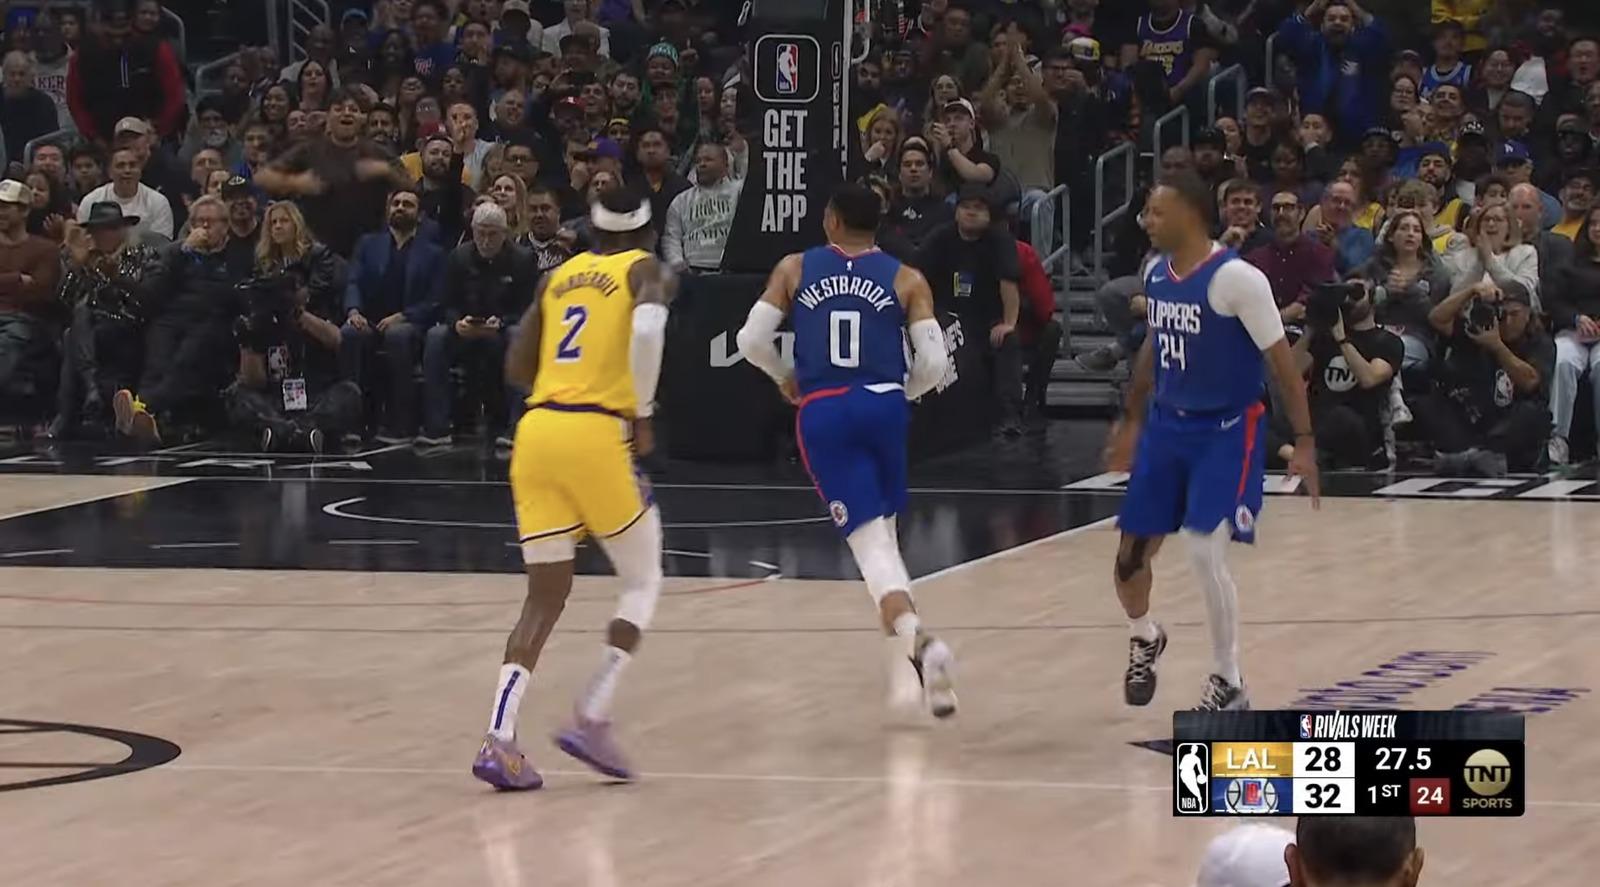 Russell Westbrook sinks a three-pointer without his shoe as Clippers defeat Lakers